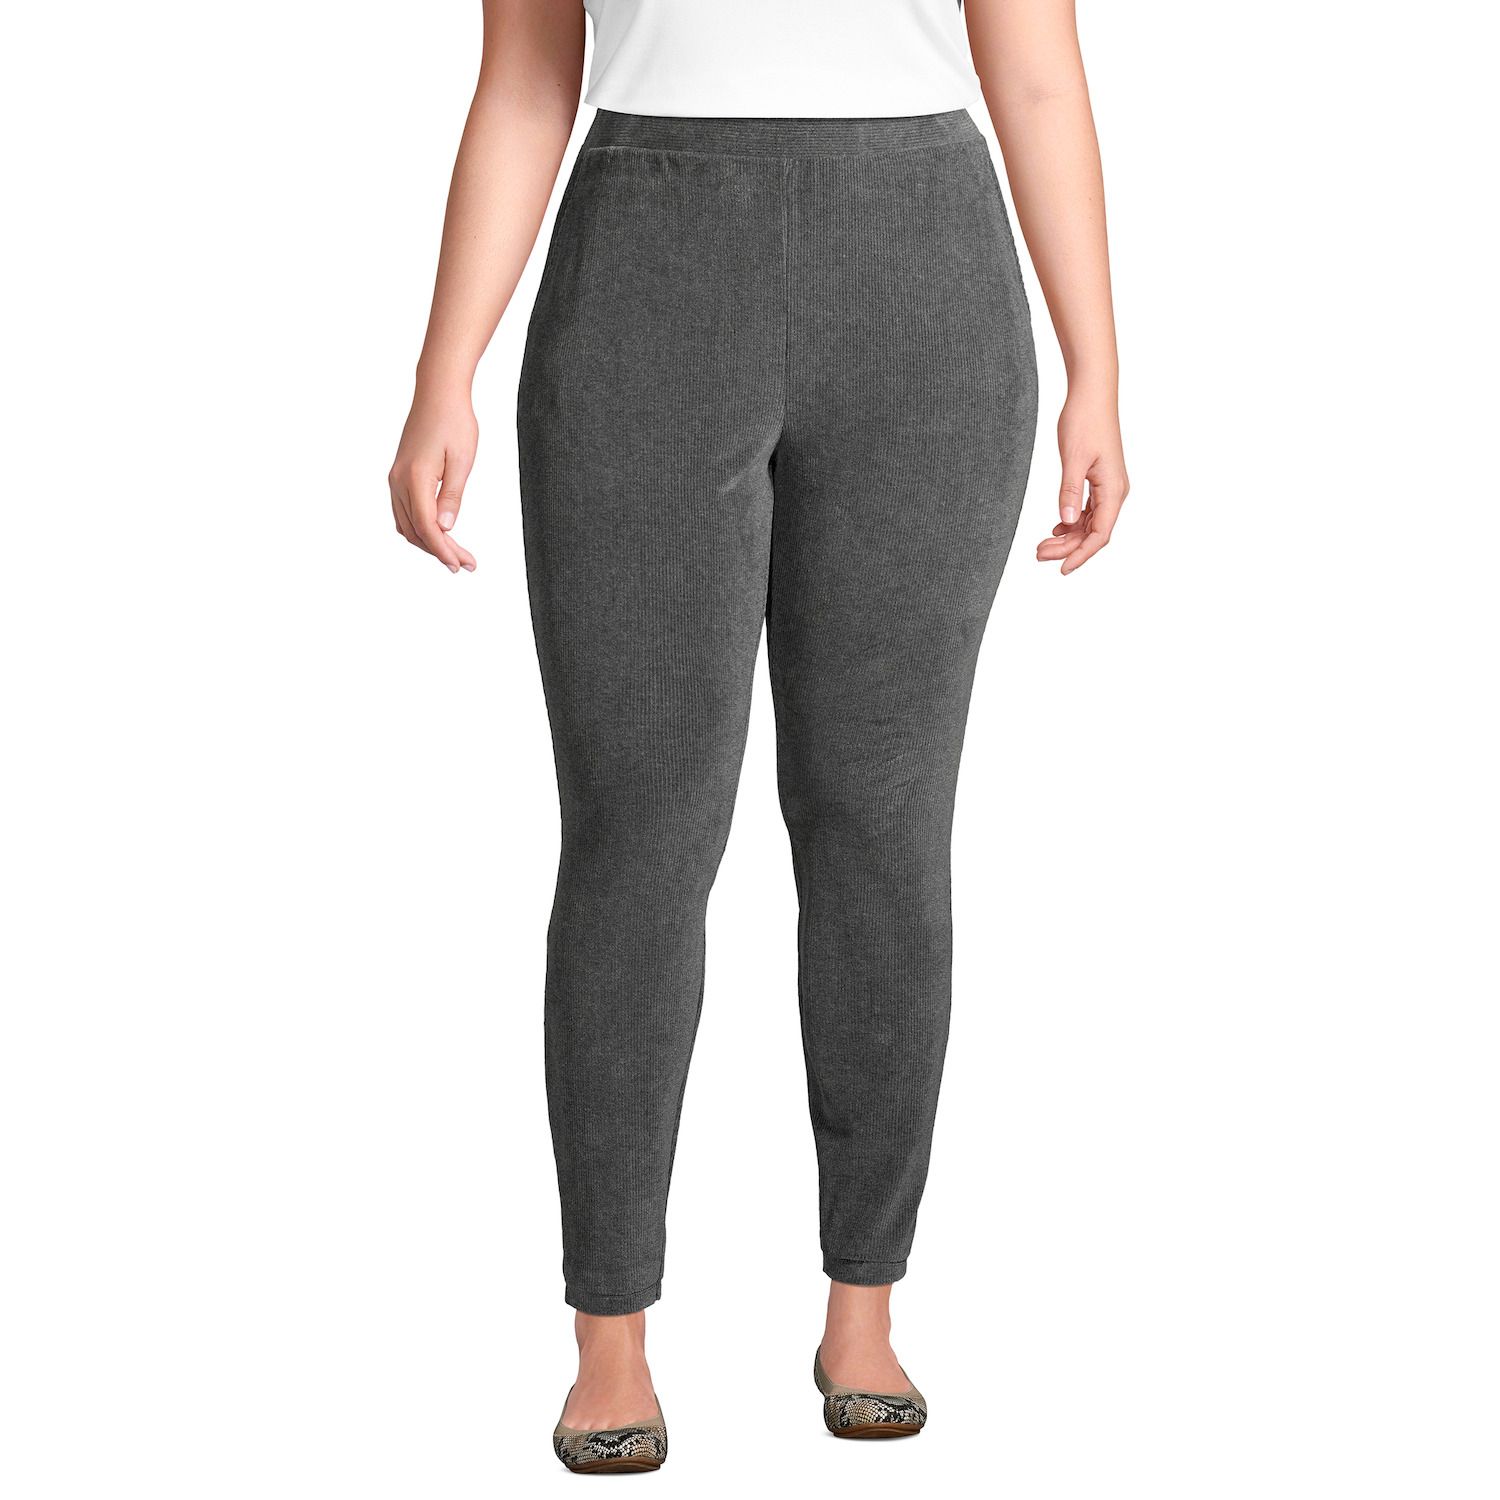 Image for Lands' End Plus Size Sport Knit High-Waisted Corduroy Leggings at Kohl's.